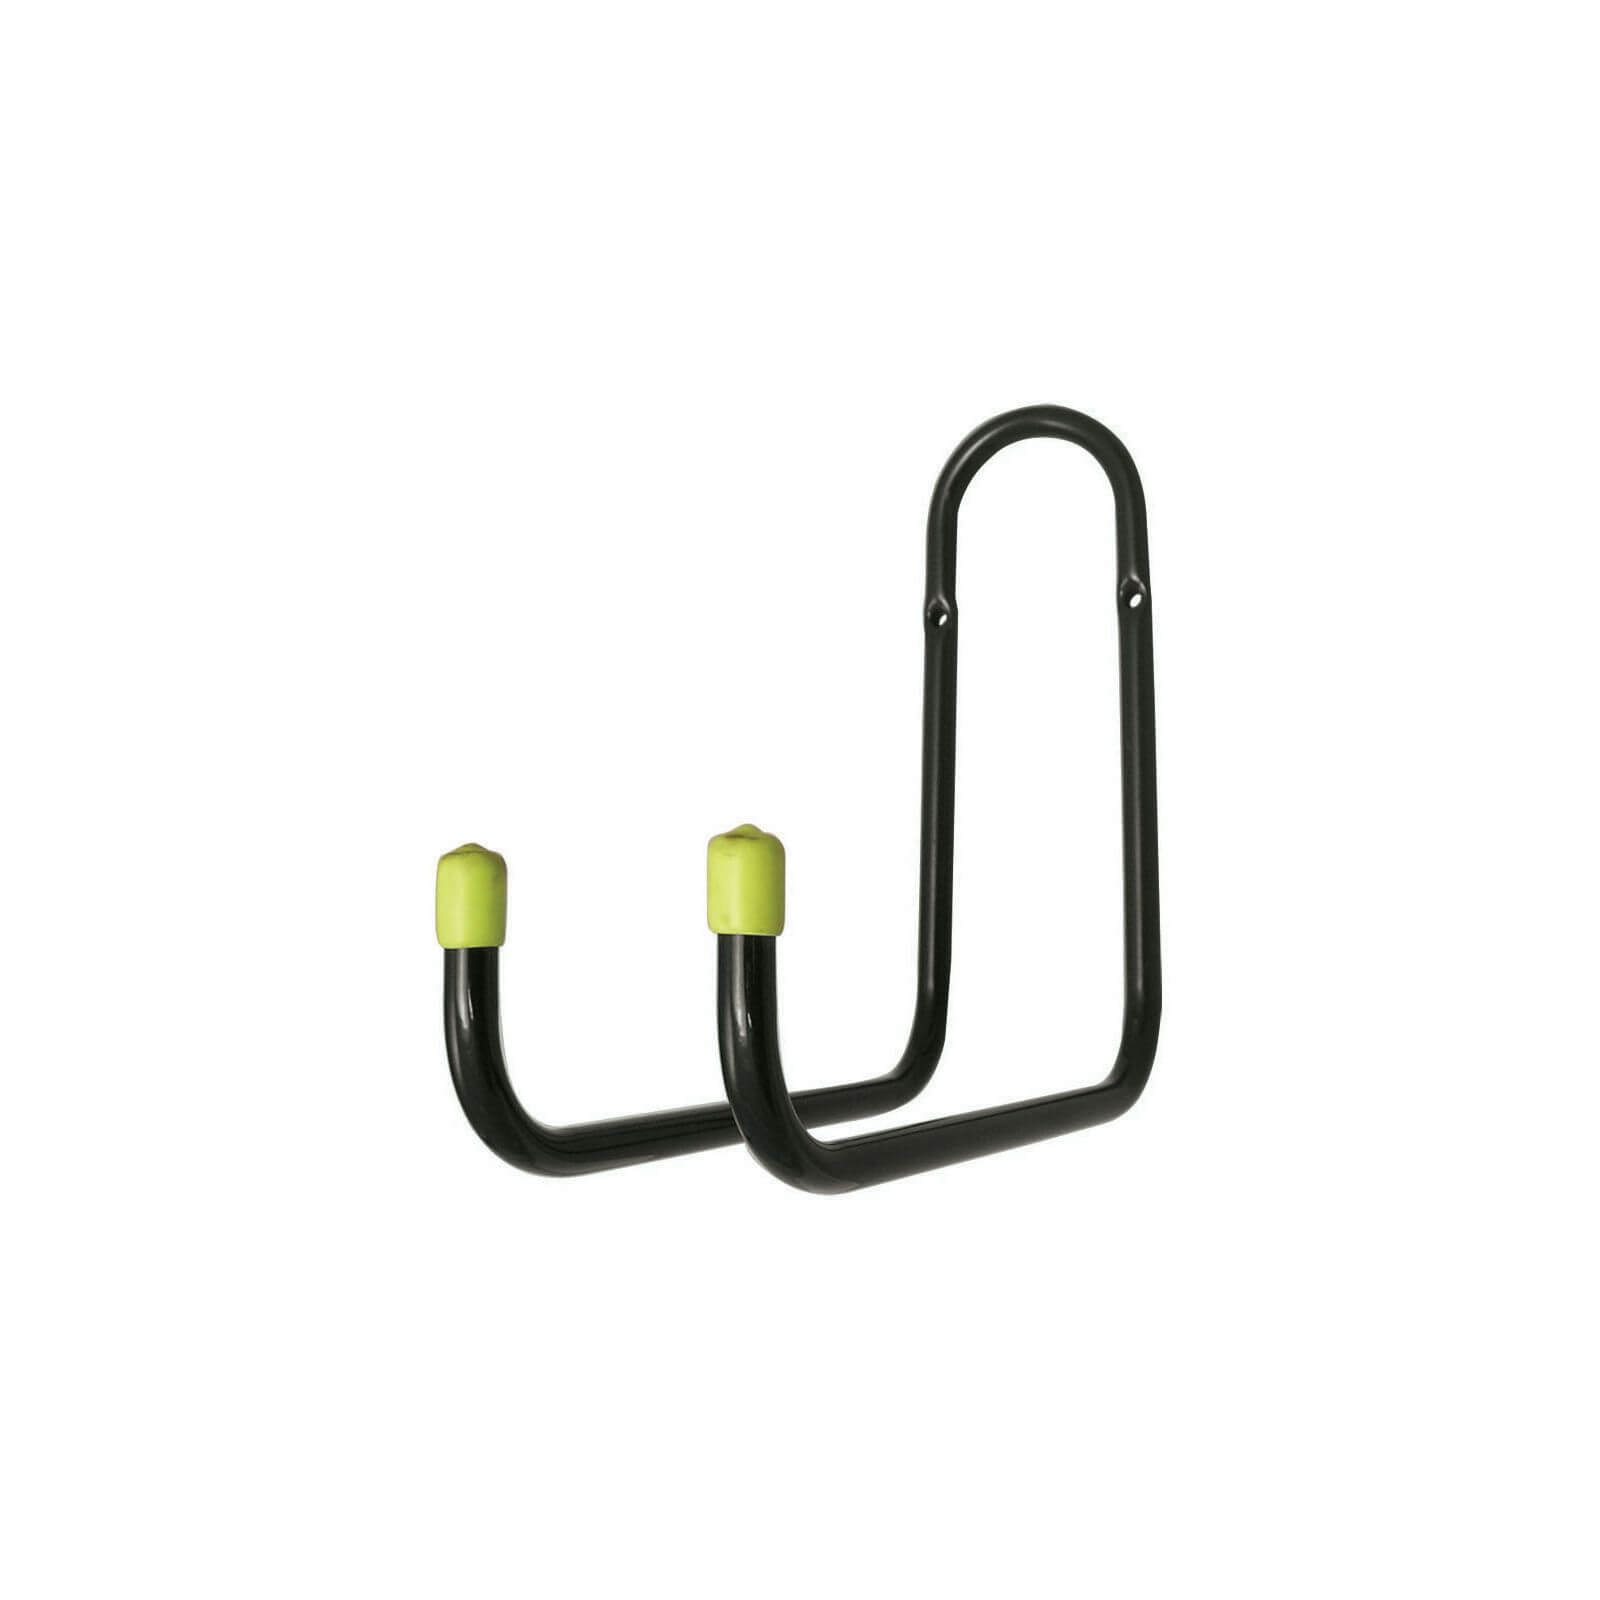 Utility Double Hook - Blue and Green - 220mm